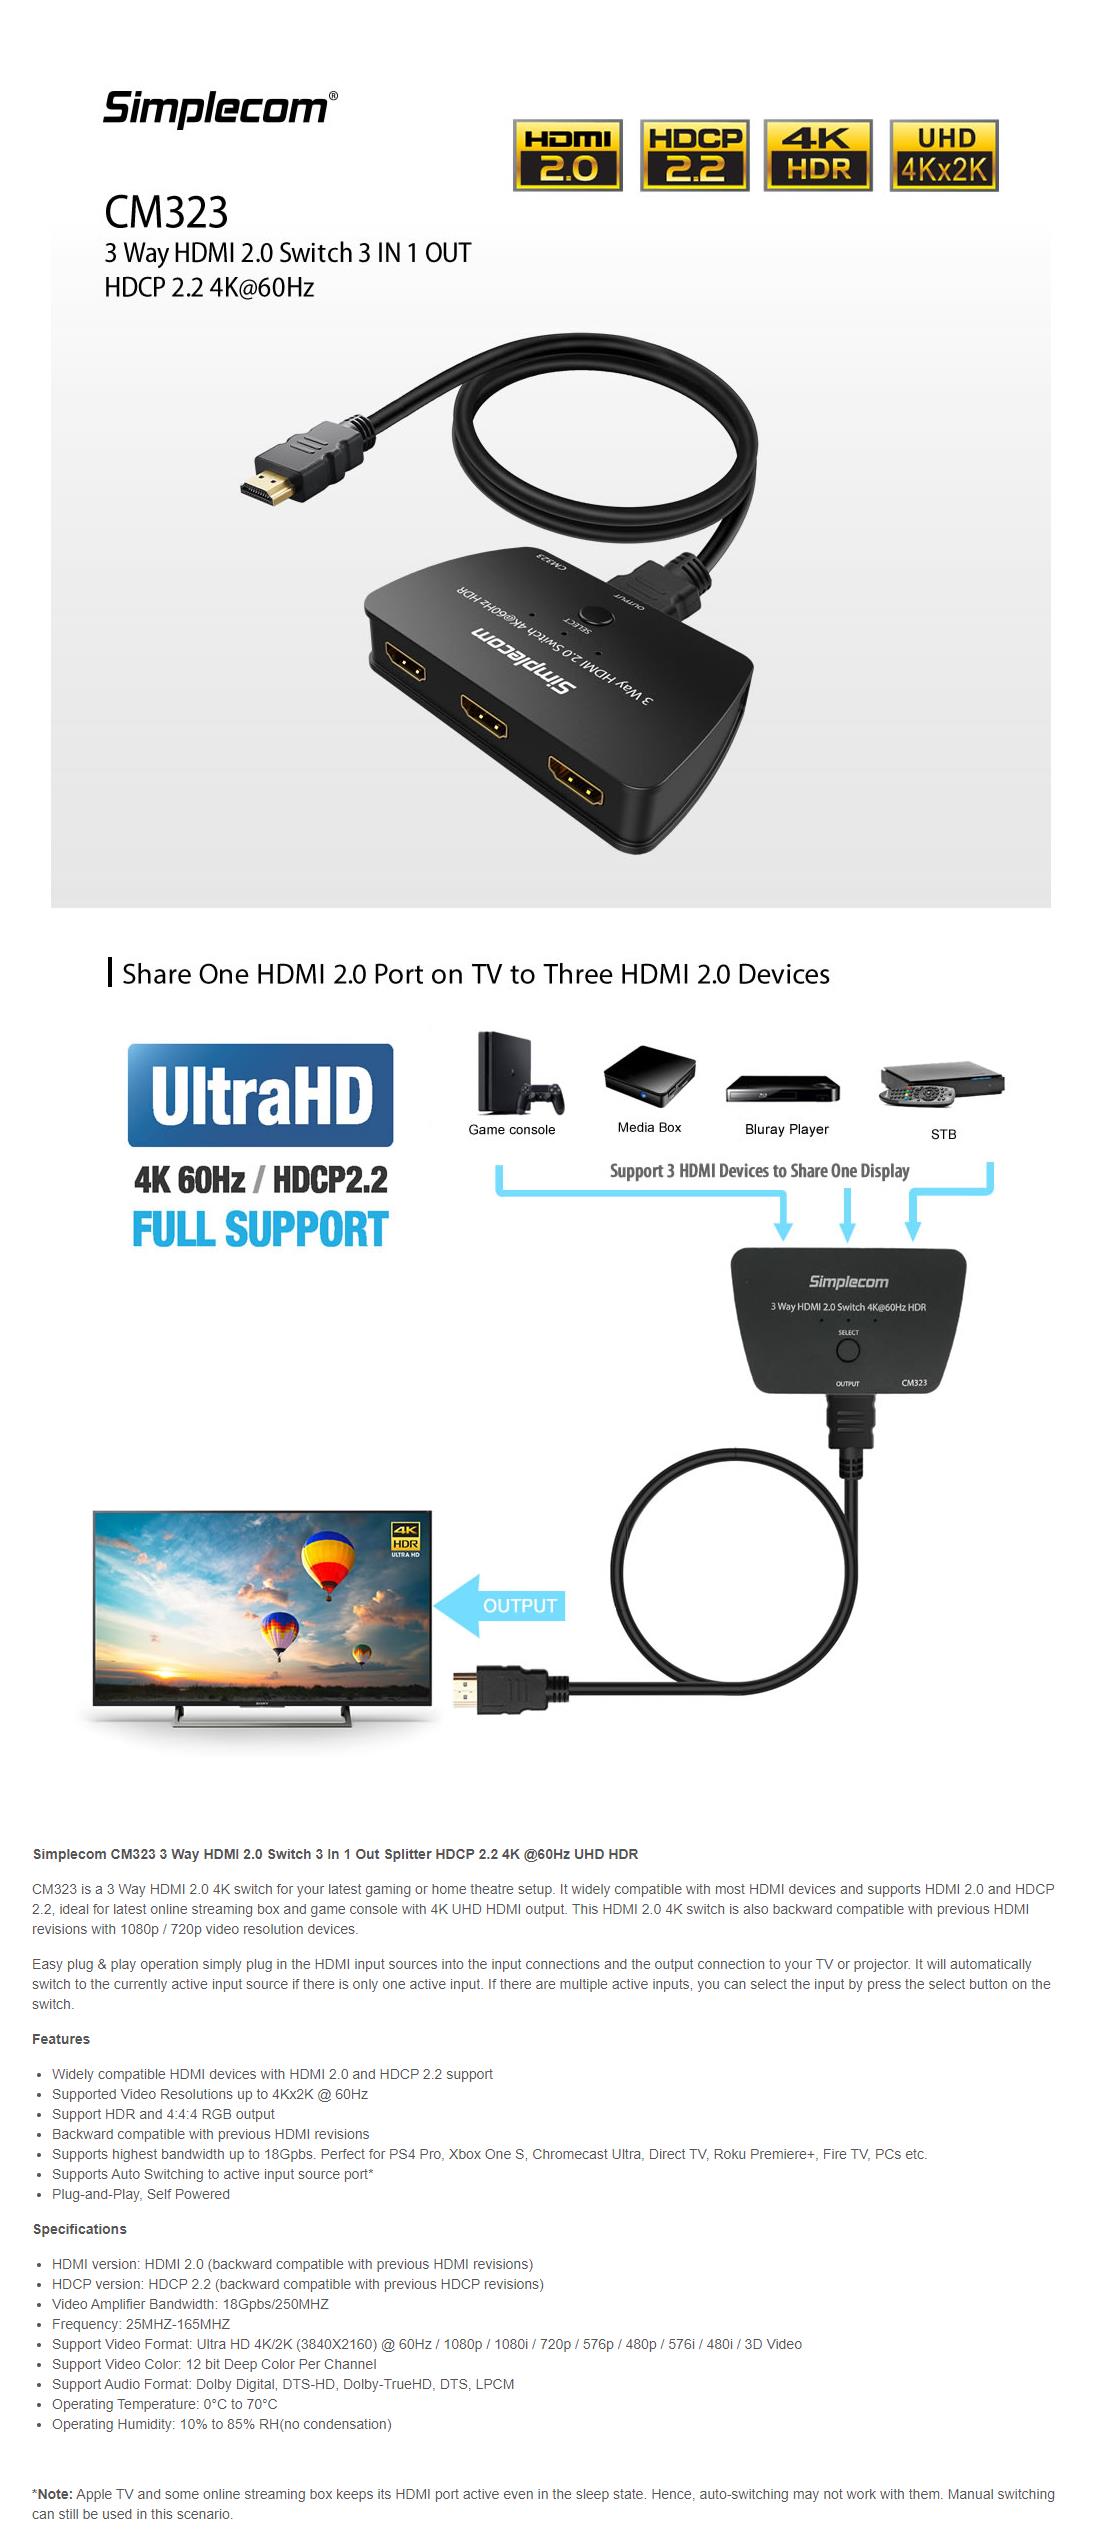 A large marketing image providing additional information about the product Simplecom CM323 3 Way HDMI 2.0 Switch 3 In 1 Out Splitter HDCP 2.2 4K 60Hz HDR - Additional alt info not provided